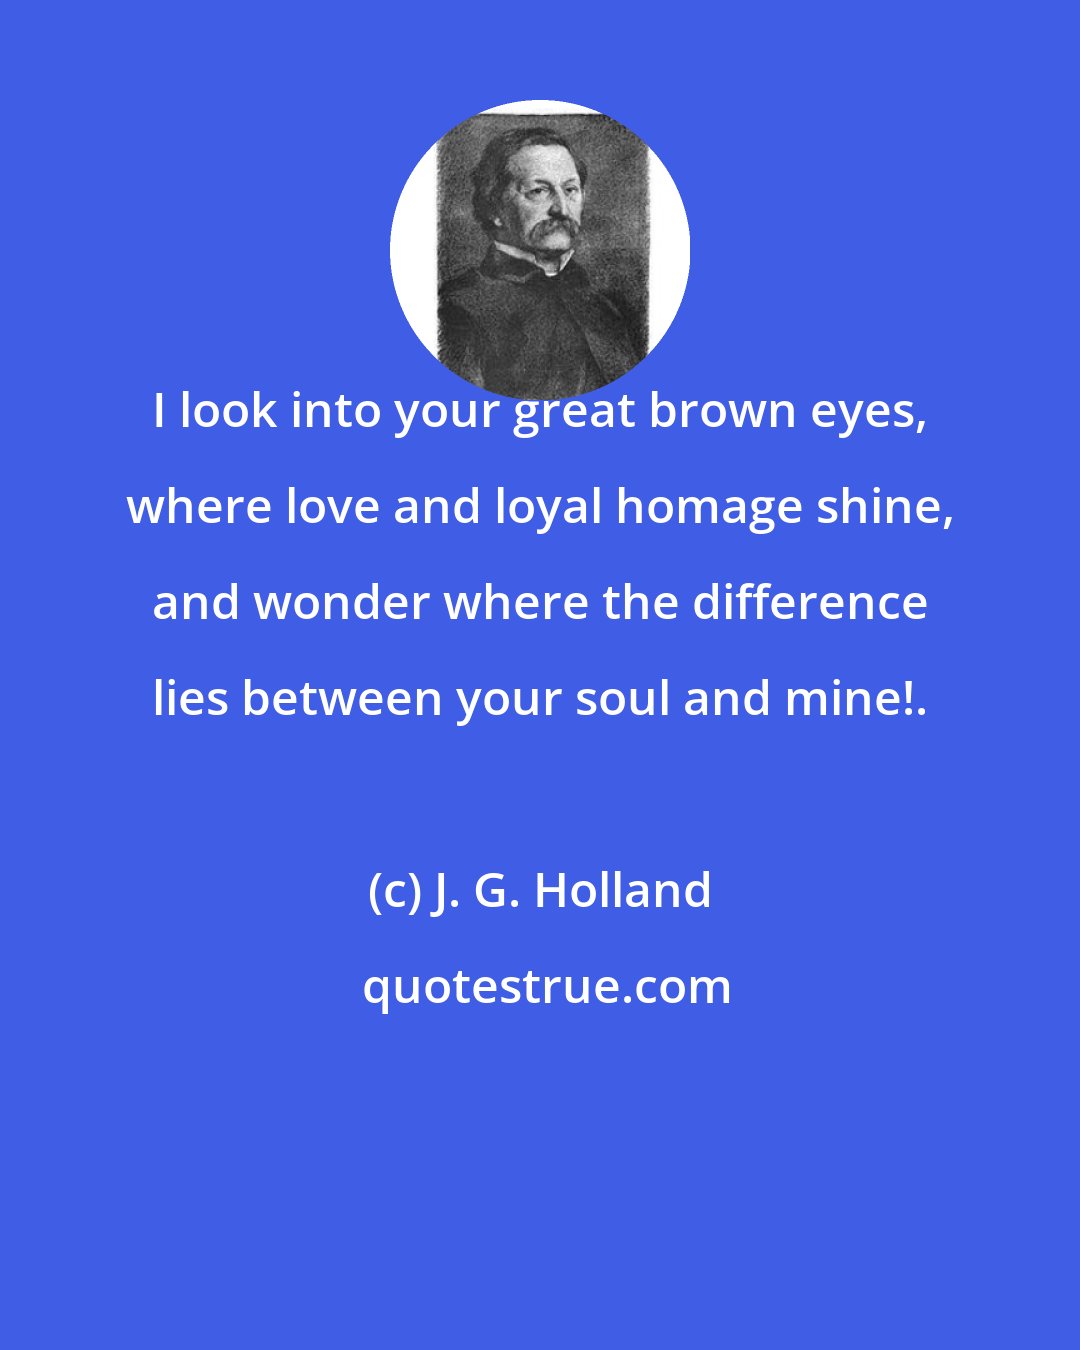 J. G. Holland: I look into your great brown eyes, where love and loyal homage shine, and wonder where the difference lies between your soul and mine!.